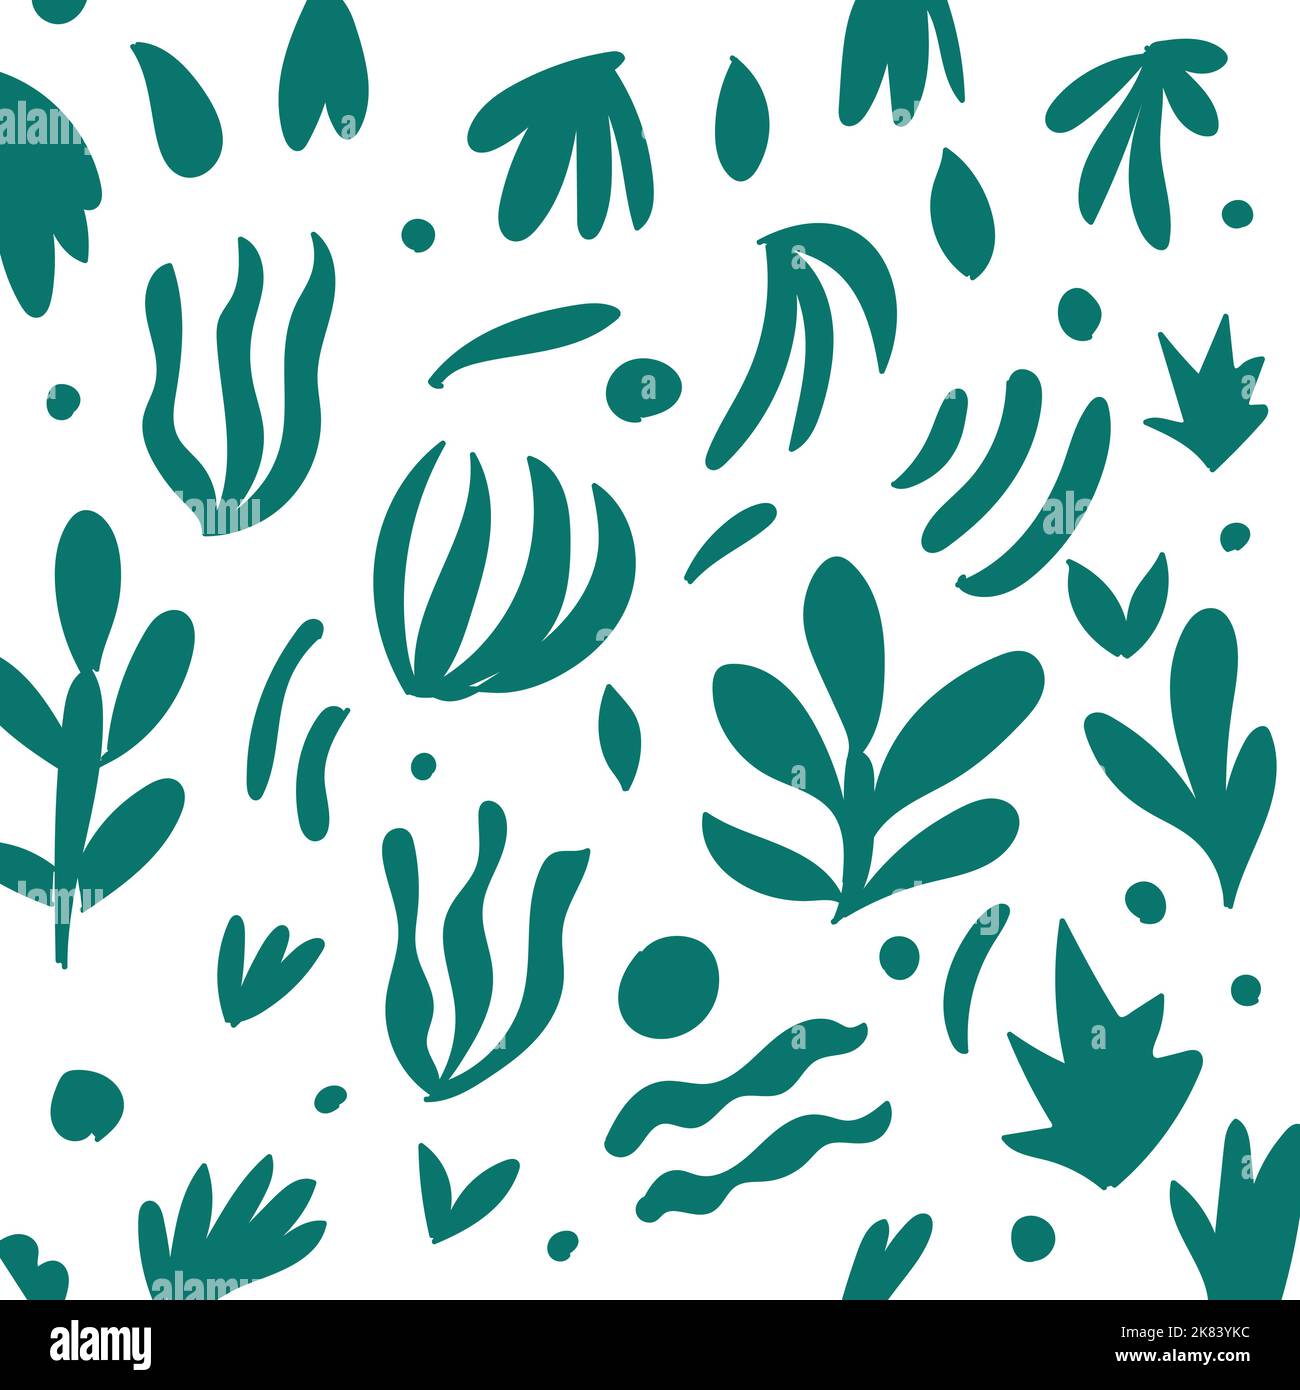 A pattern of green plants under water. Stock Vector